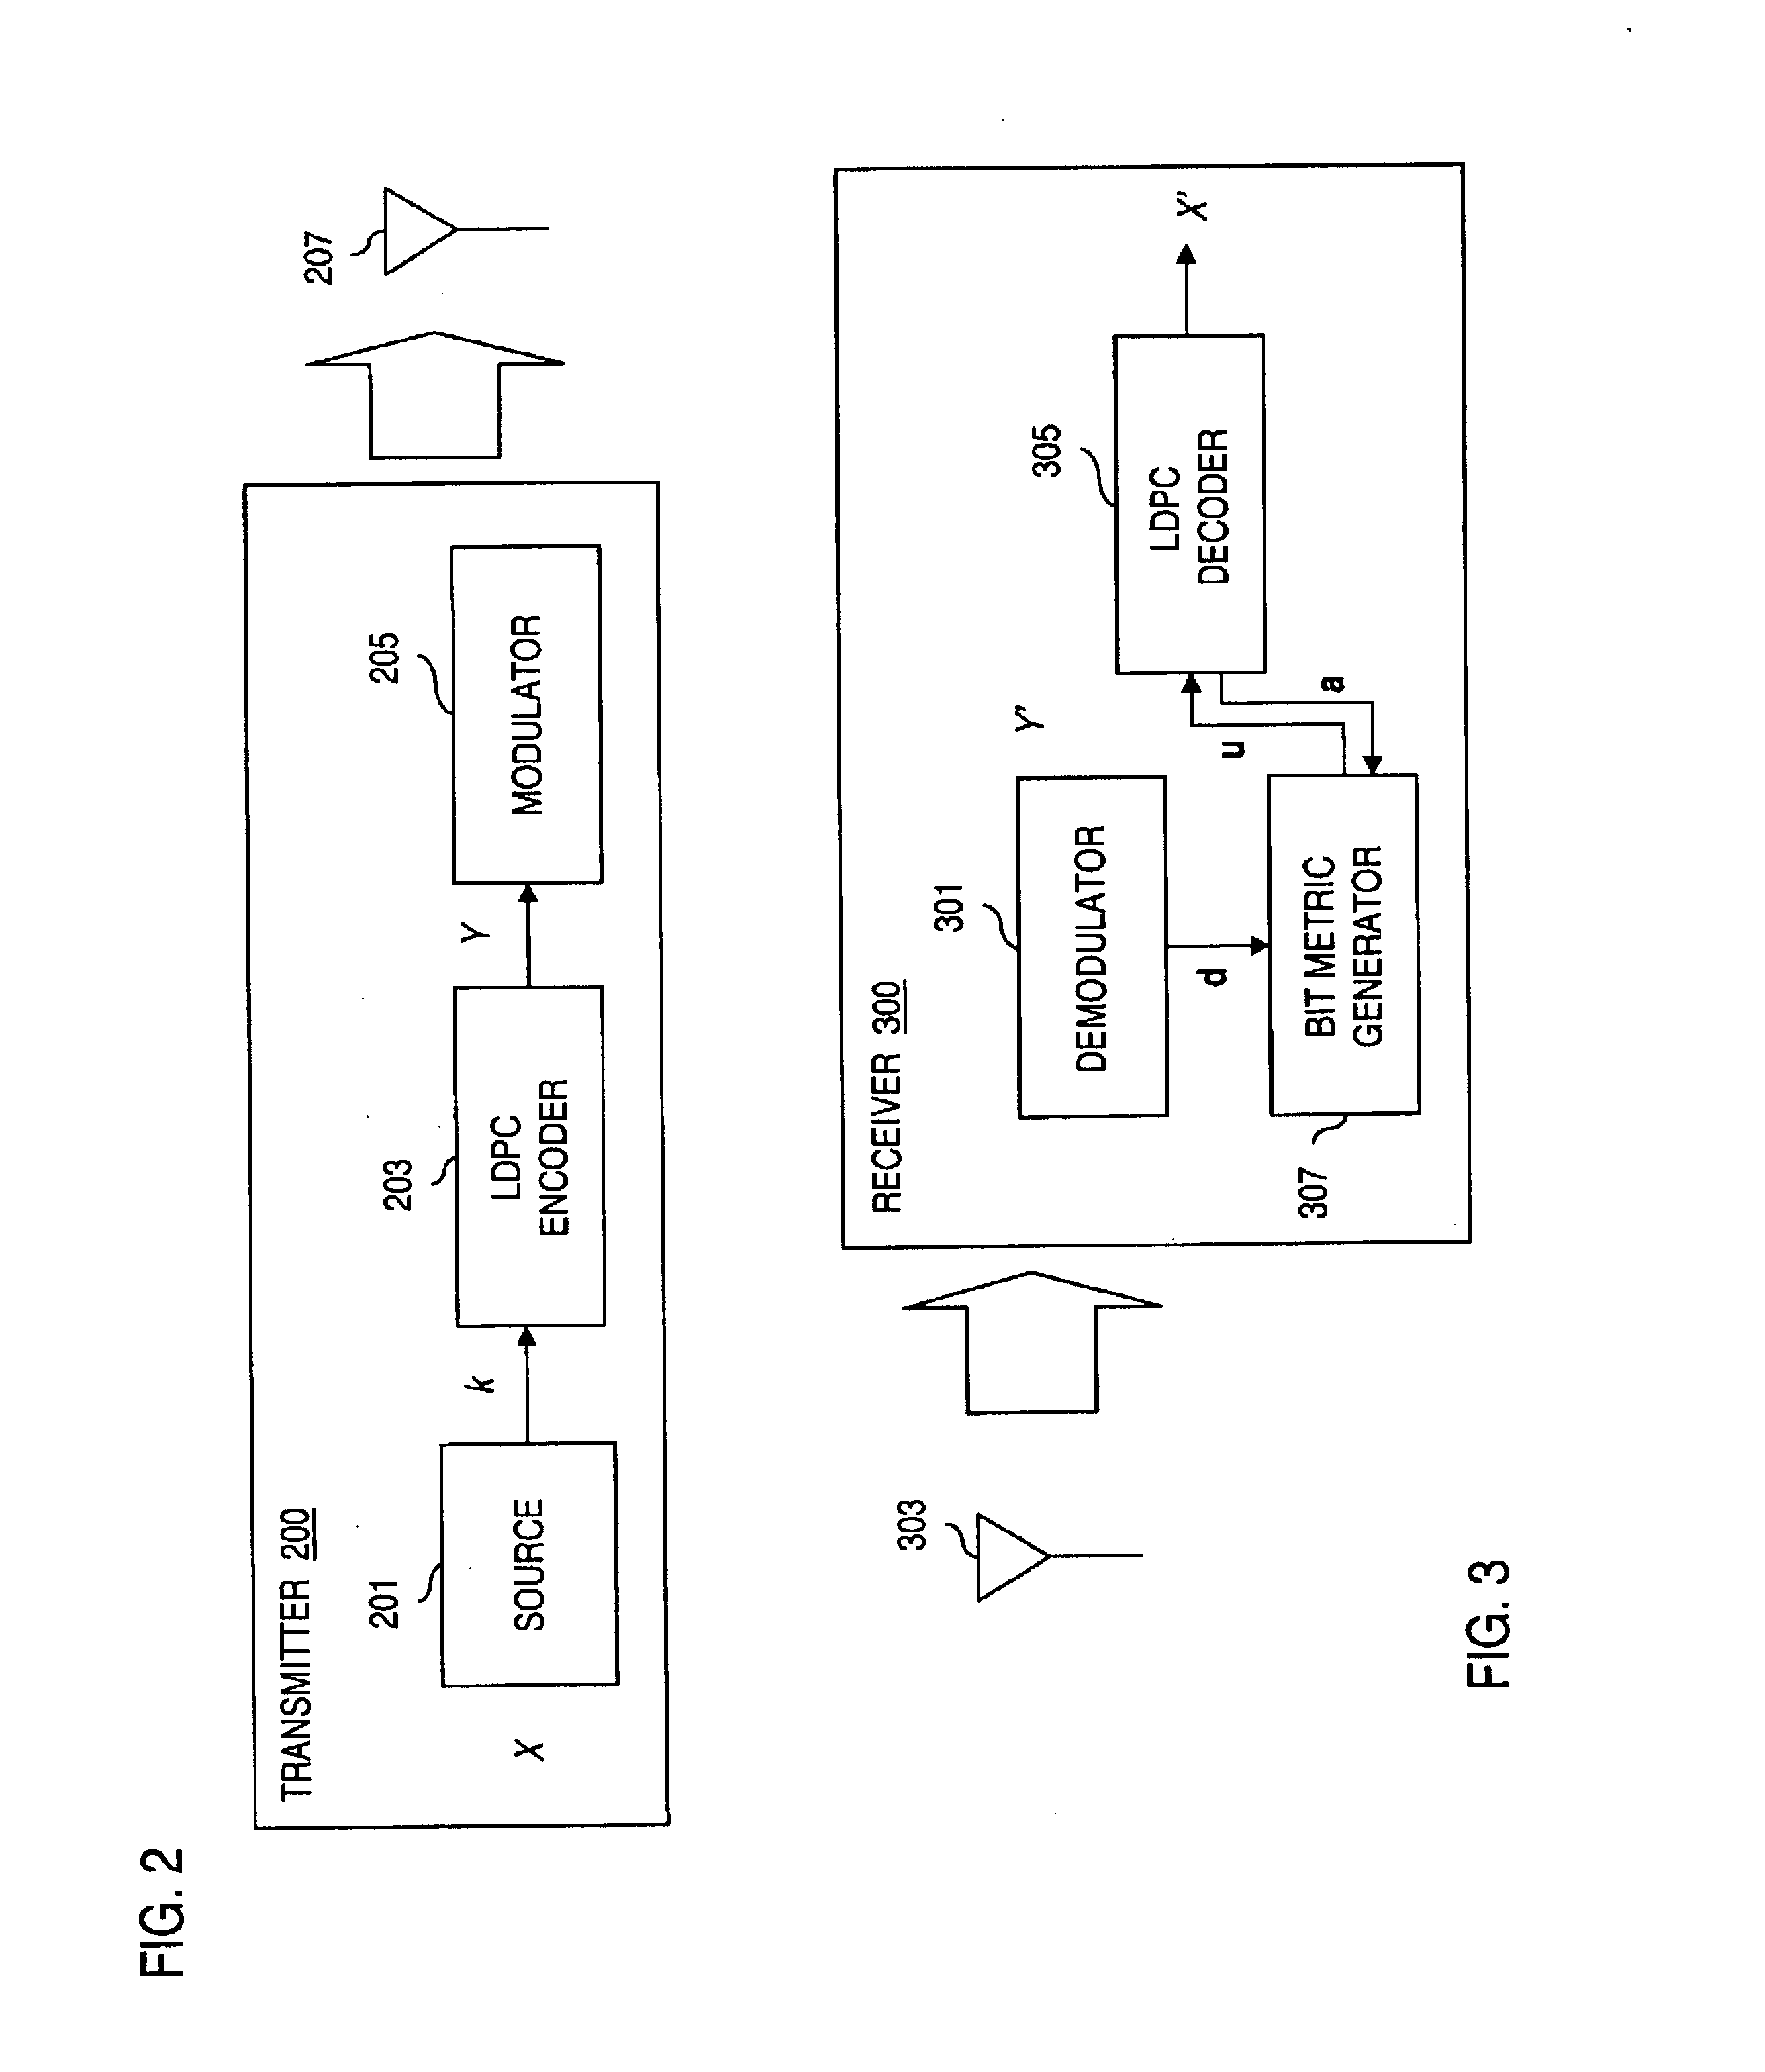 Method and system for decoding low density parity check (LDPC) codes